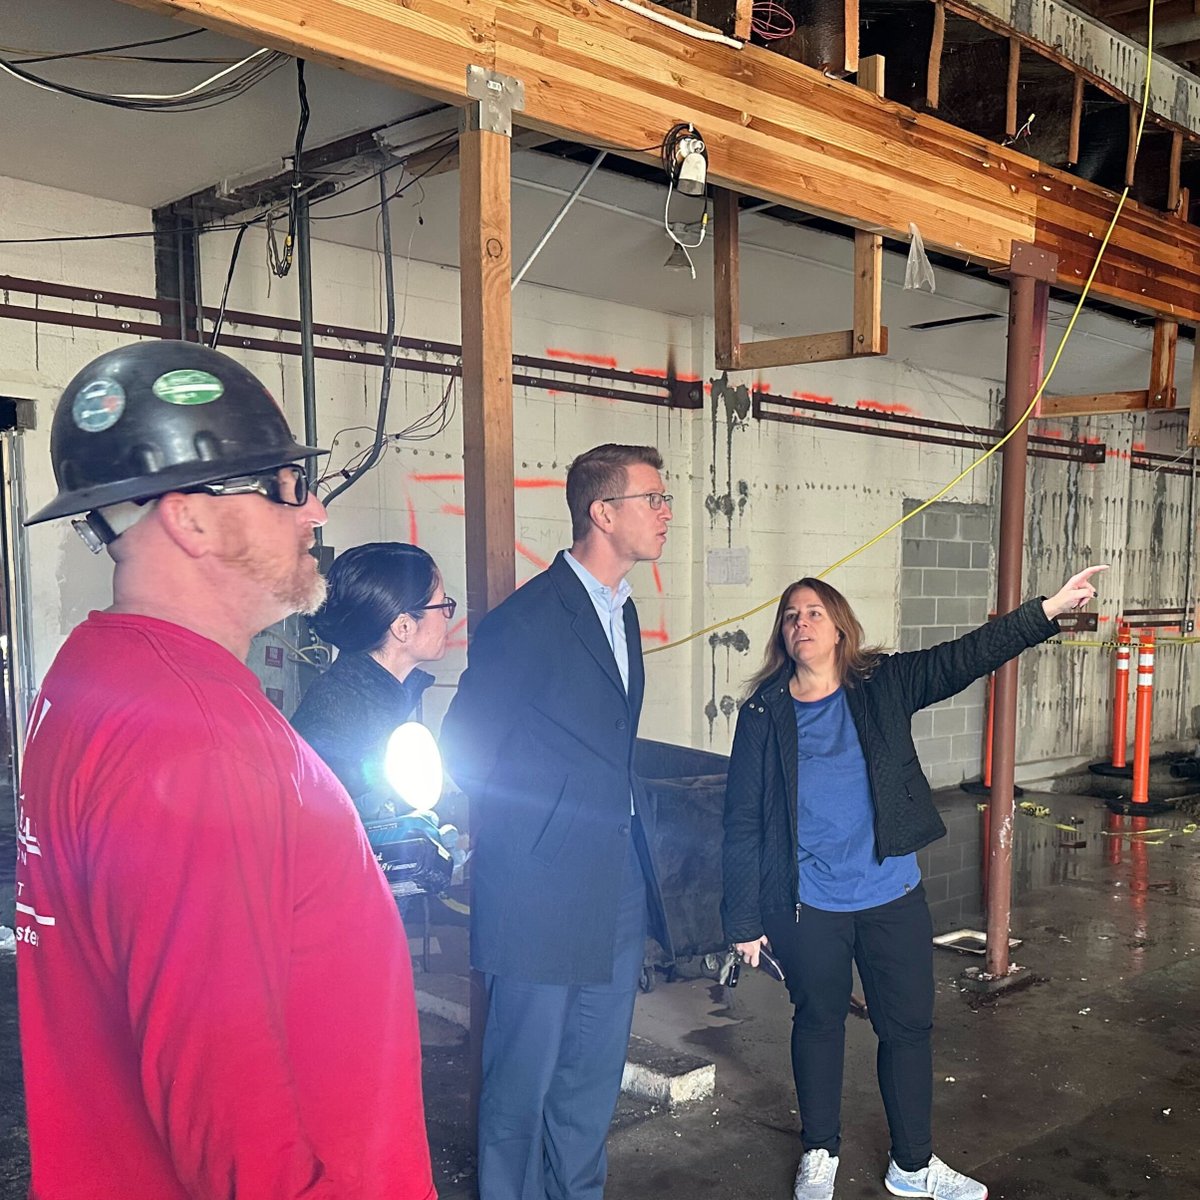 Last month, I checked out the new Peninsula Community Health Services facility in Bremerton. Efforts to provide care and housing are pivotal for our community’s health and well-being, and I’m proud to see a new facility to support this work in Kitsap County.